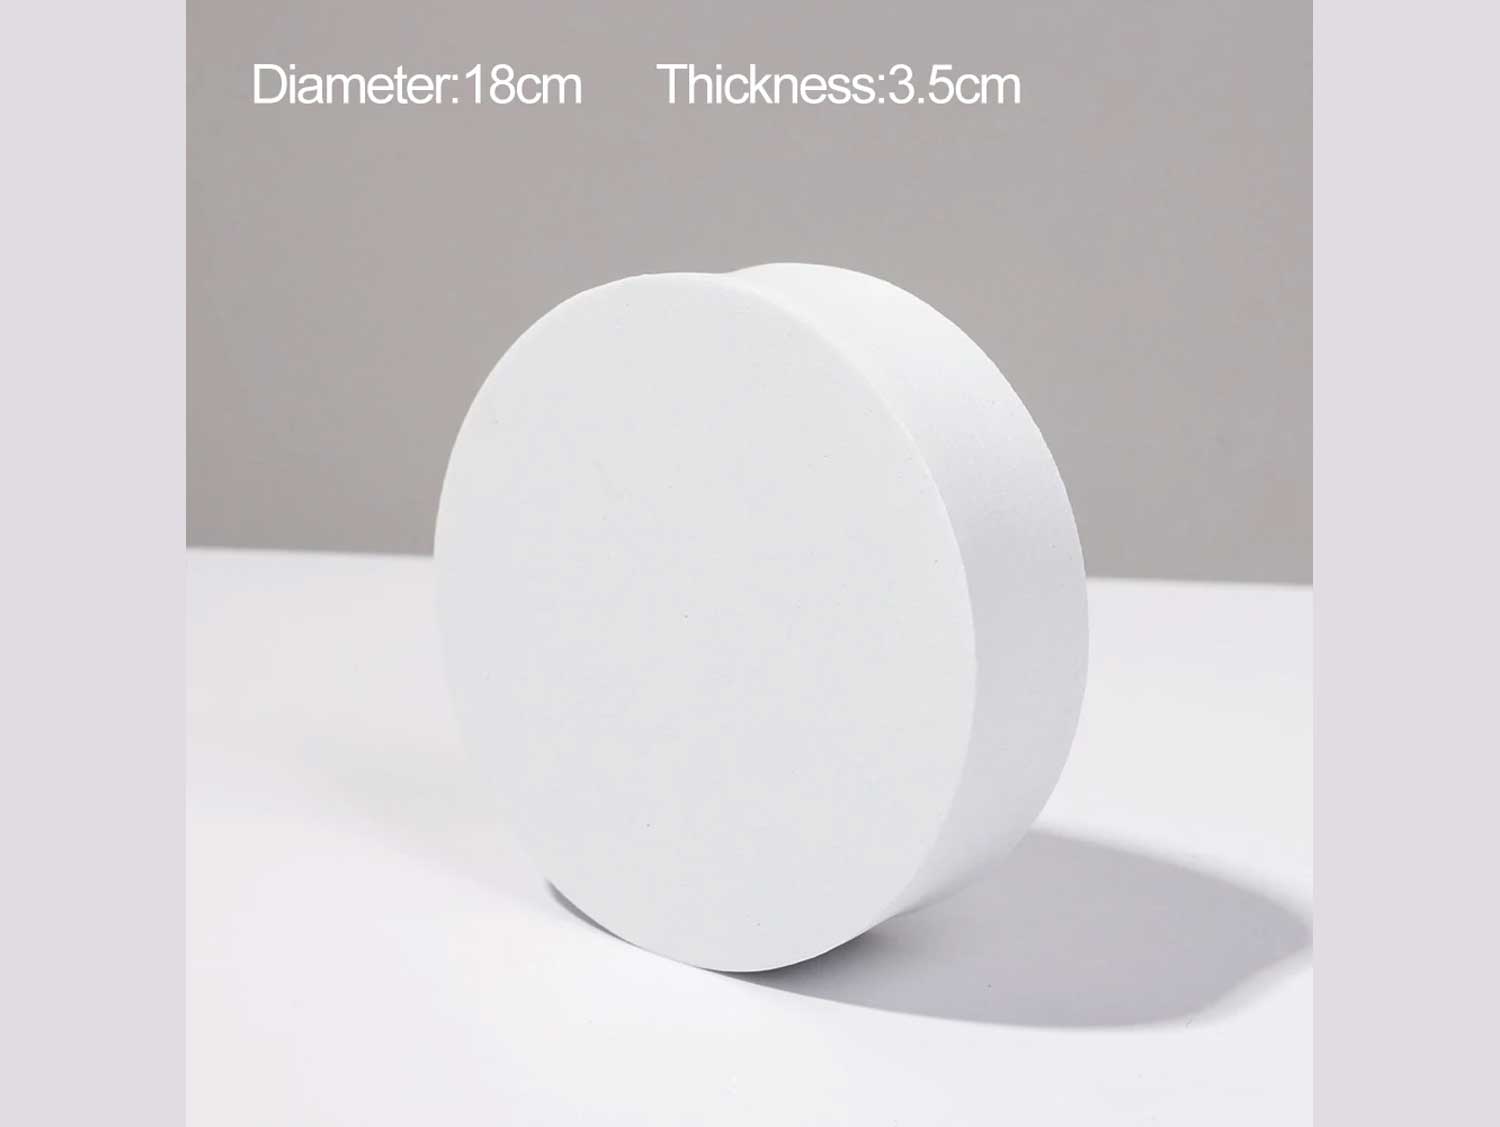 Product Photography Cylinder diameter 18cm and thickness 3.5cm